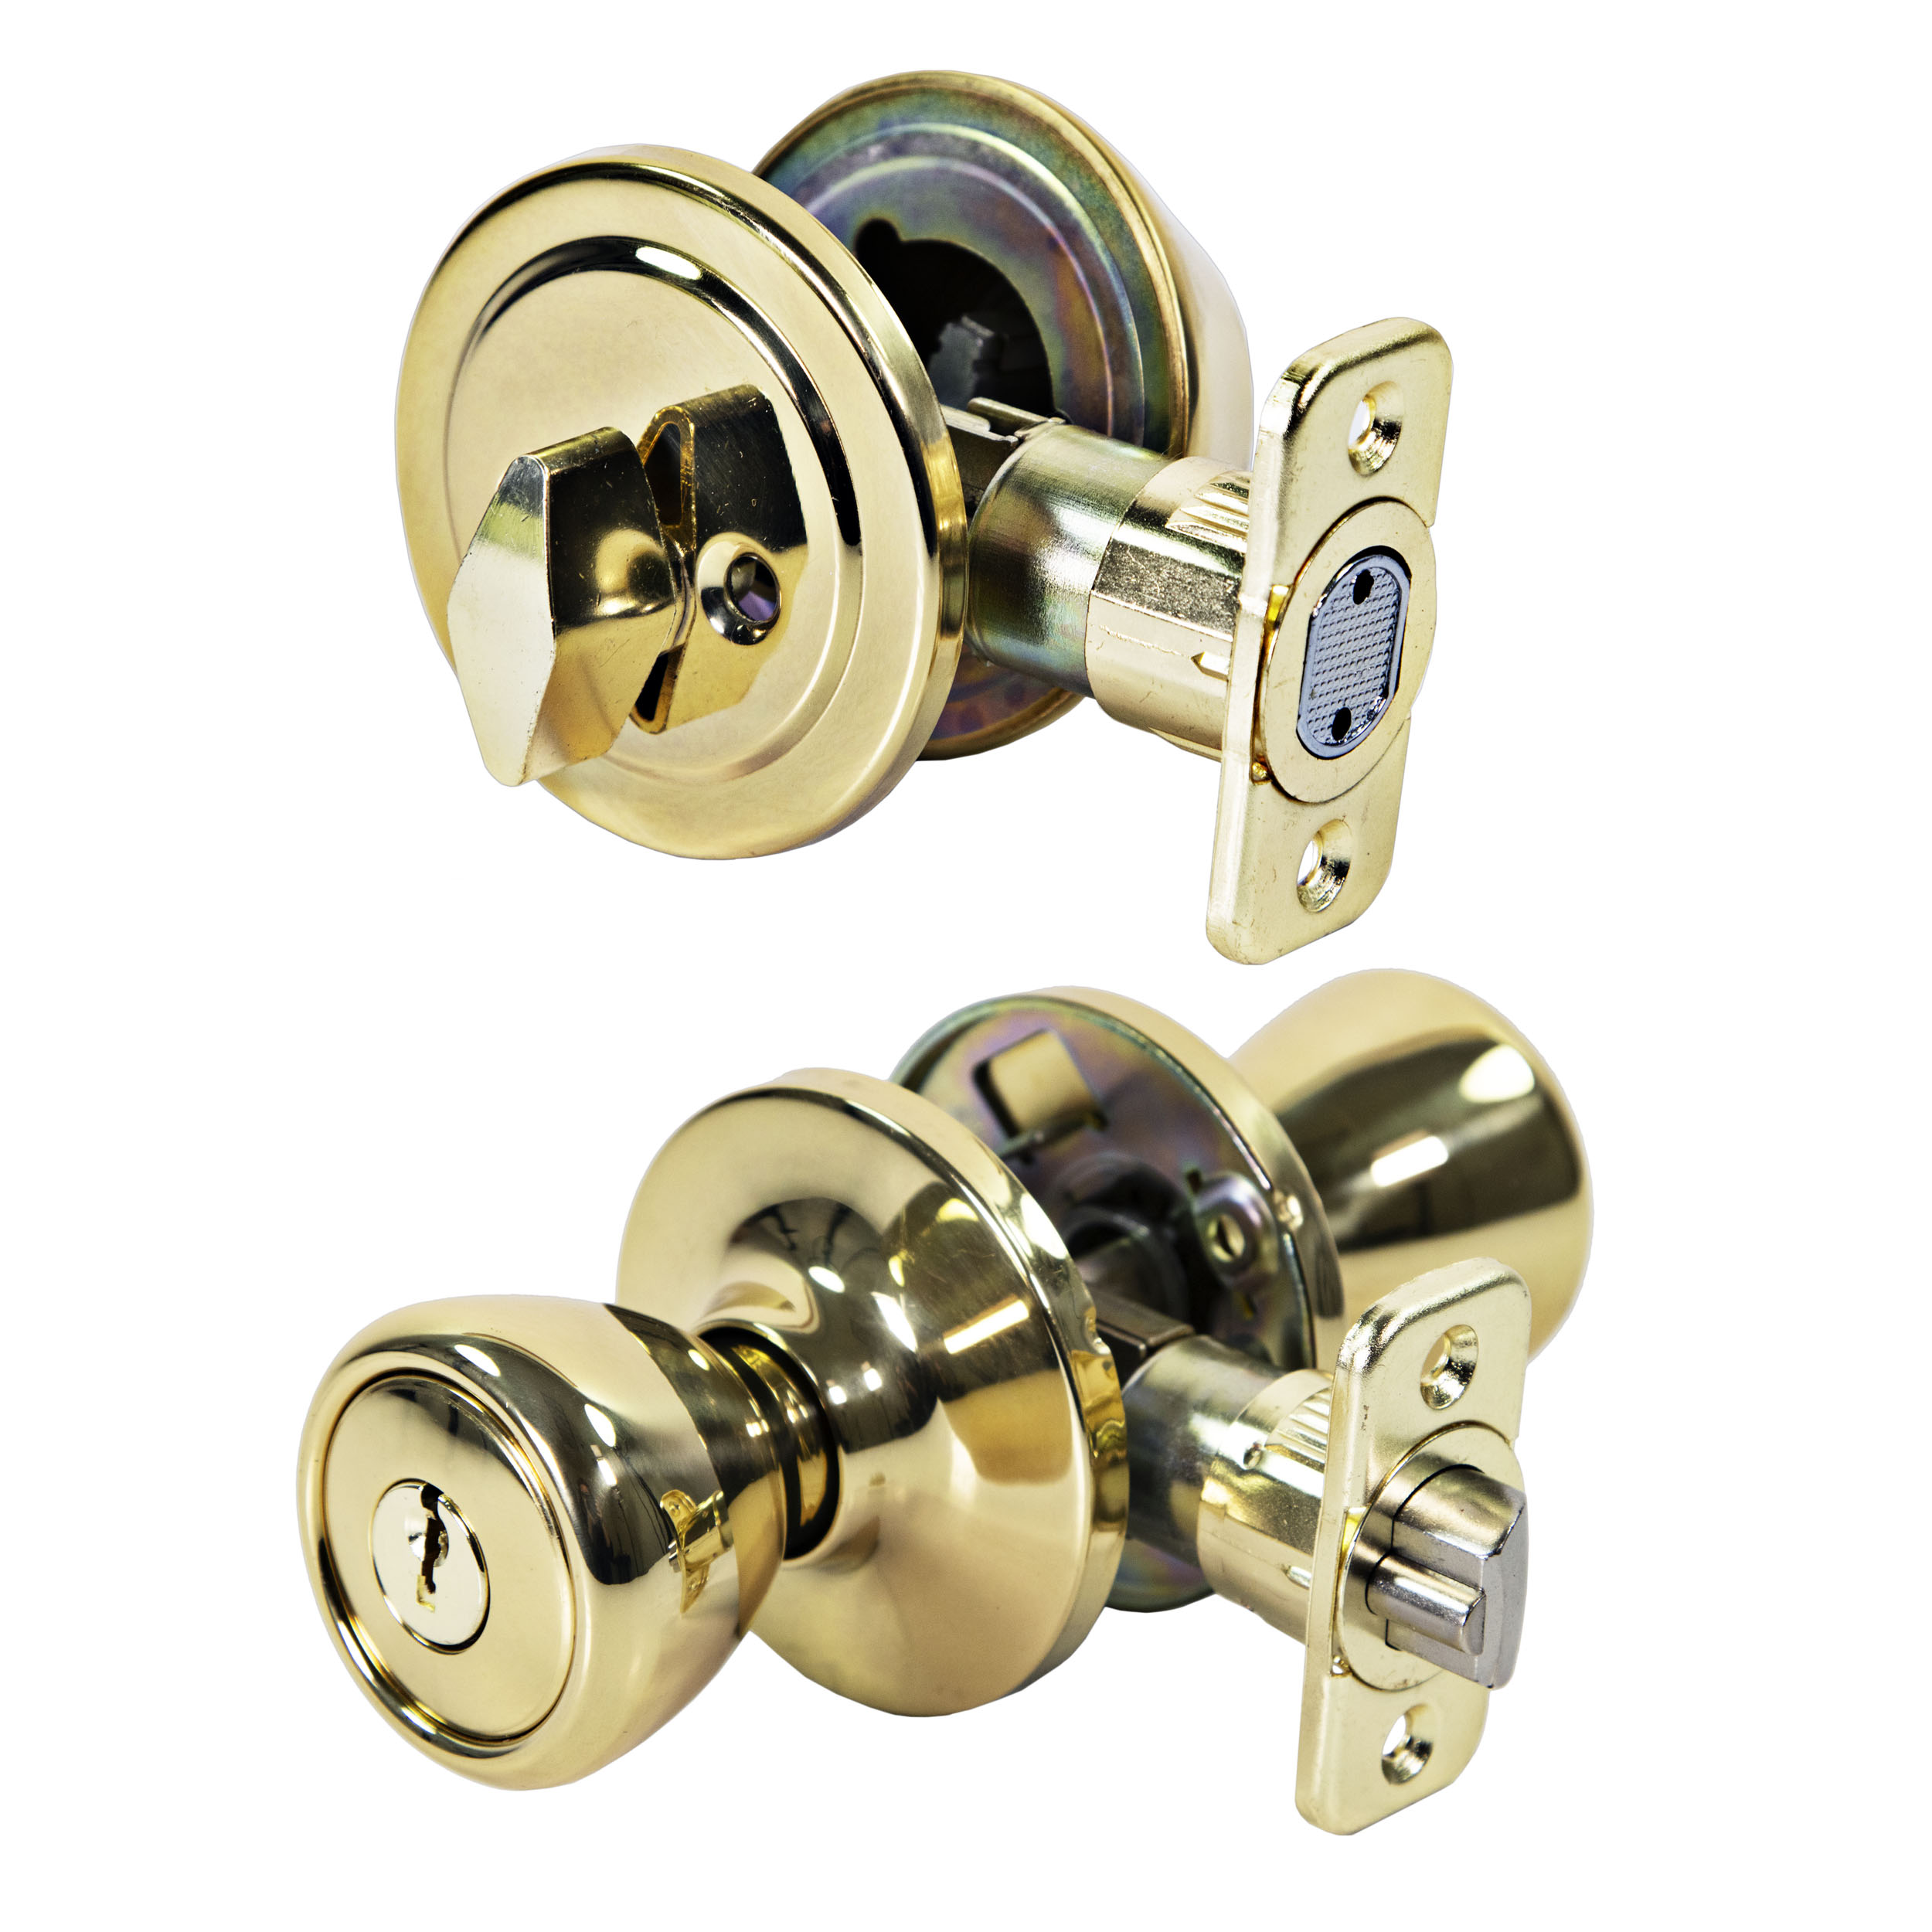 Ultra Security Rittenhouse Keyed Entry with Deadbolt Tulip Door Knob - Security Keyed Entry with Deadbolt Lockset, KW1 Keyed Entry, Fits 1-3/8" To 1-3/4" Thick Door (Polished Brass Finish, 1 Pack) - image 1 of 10